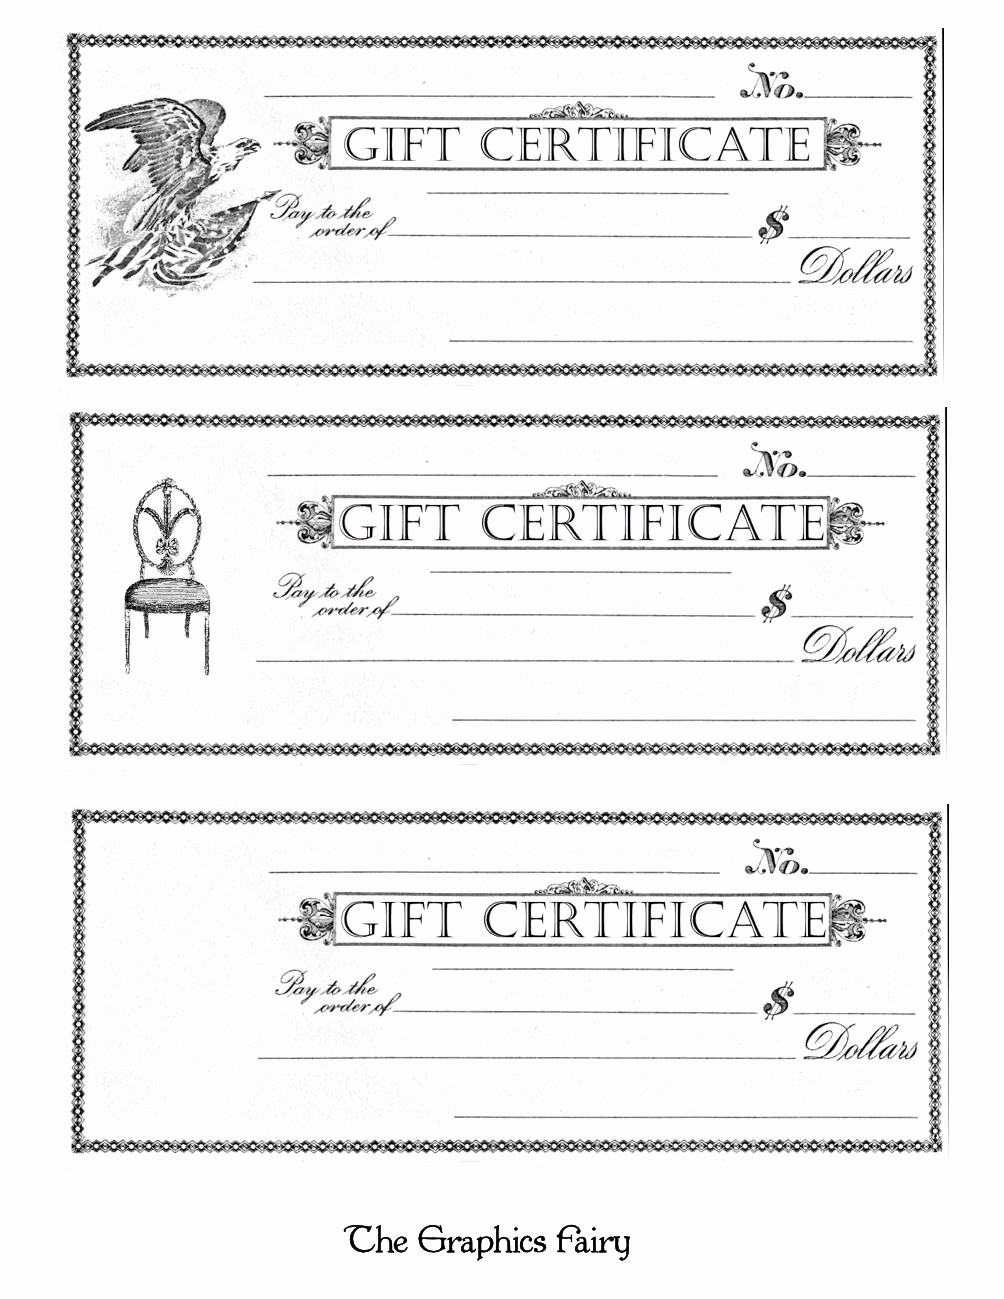 Gift Card Templates Free Printable New Free Printable Gift Certificates the Graphics Fairy